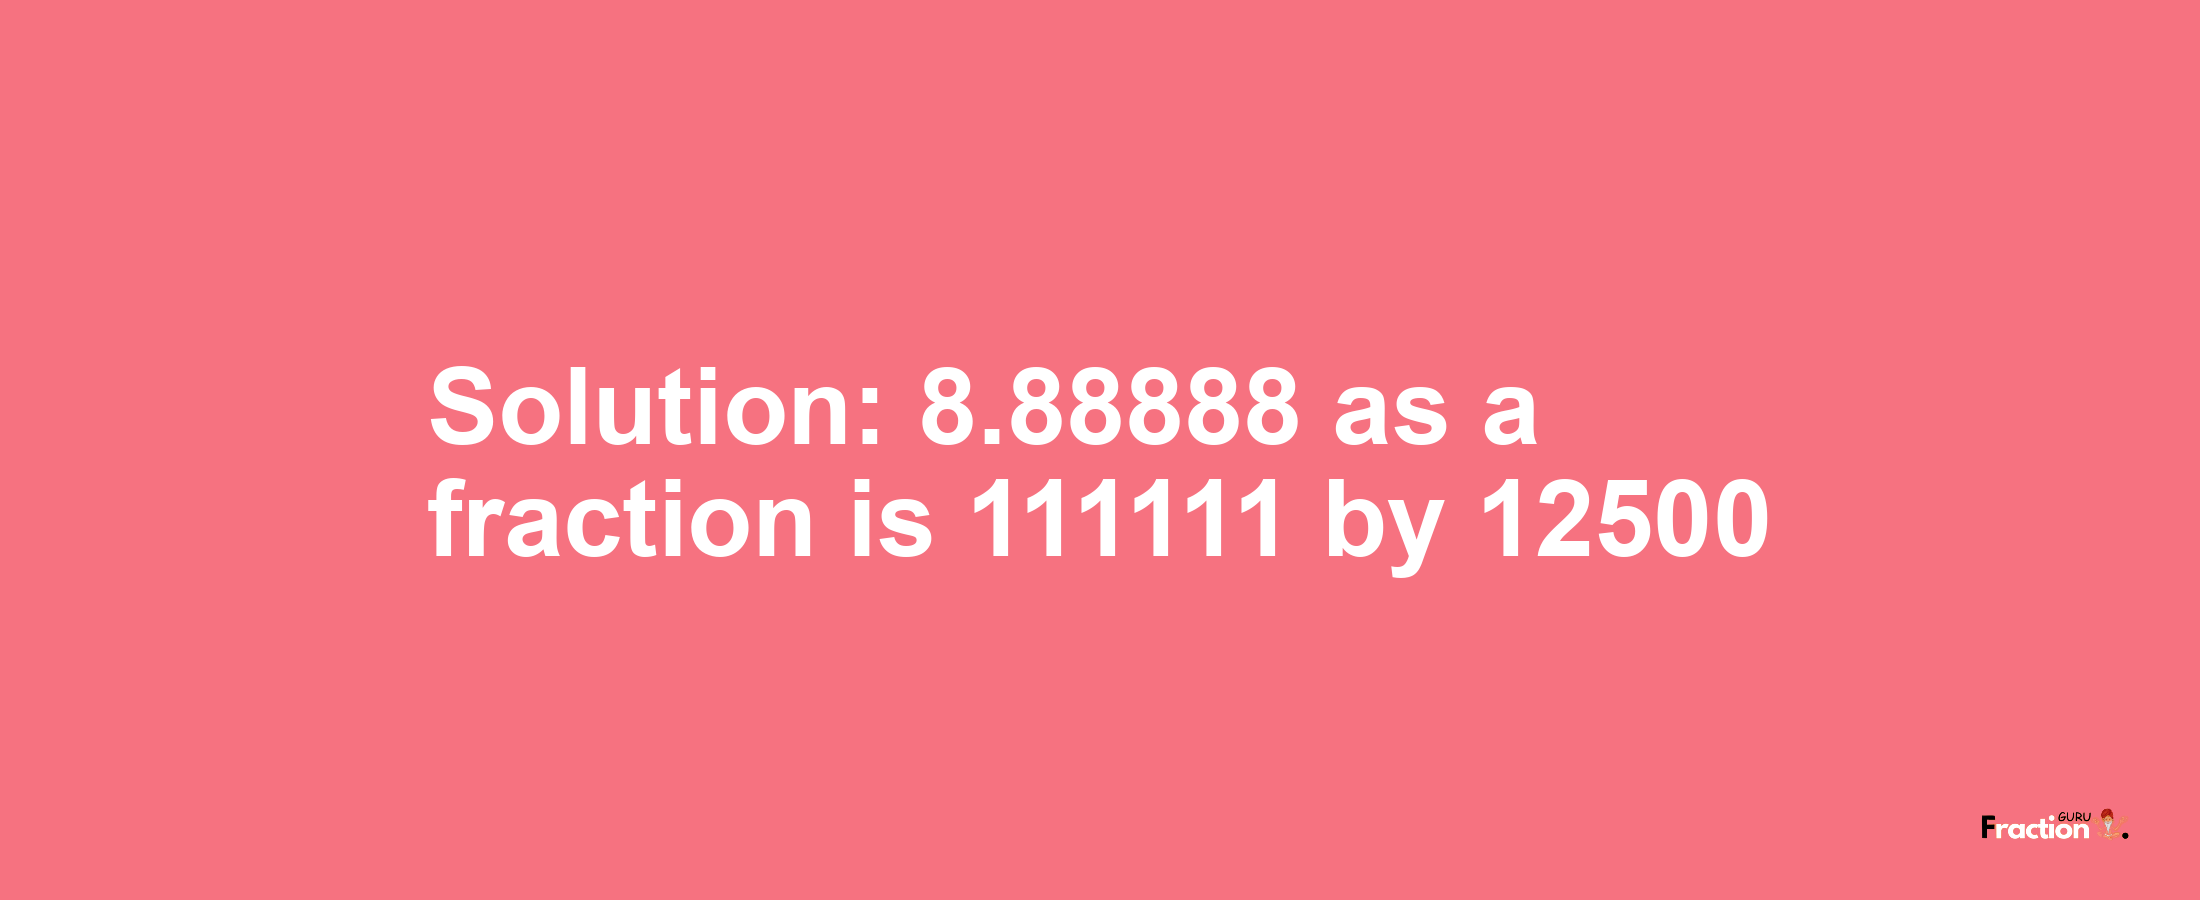 Solution:8.88888 as a fraction is 111111/12500